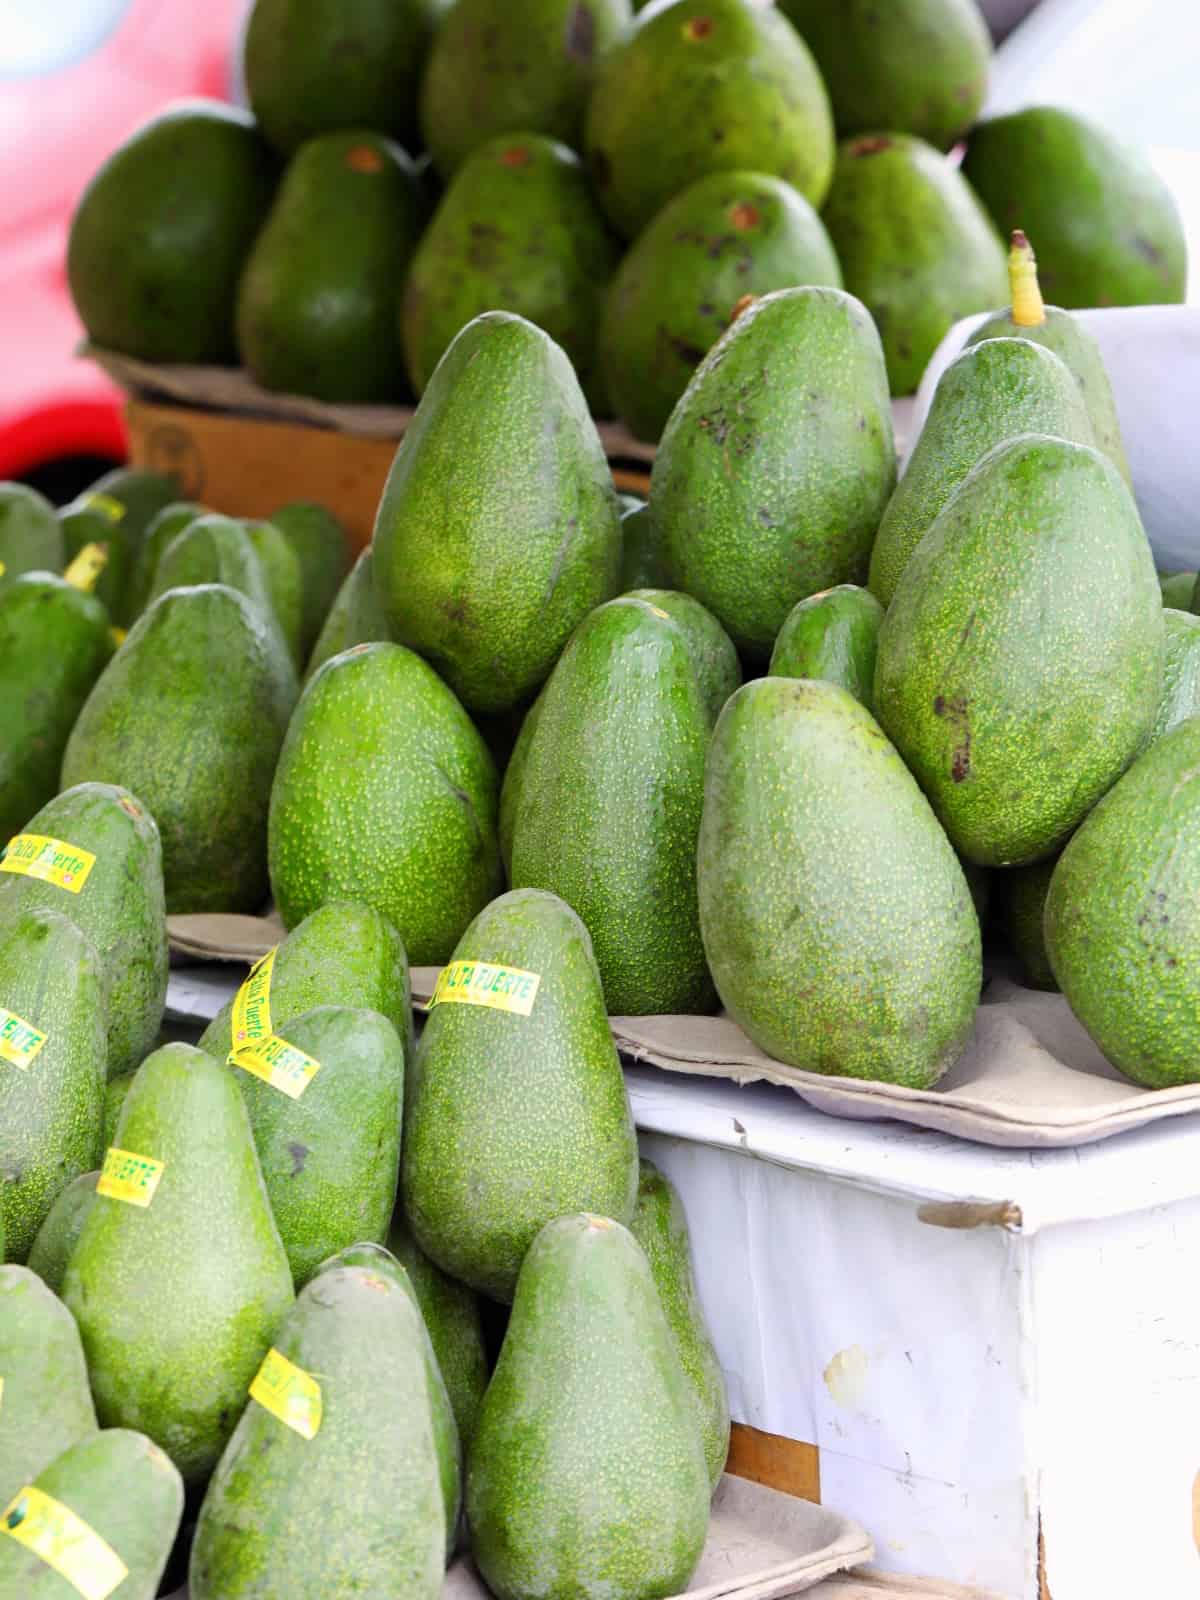 A neat organized pile of avocados in a market for sale.